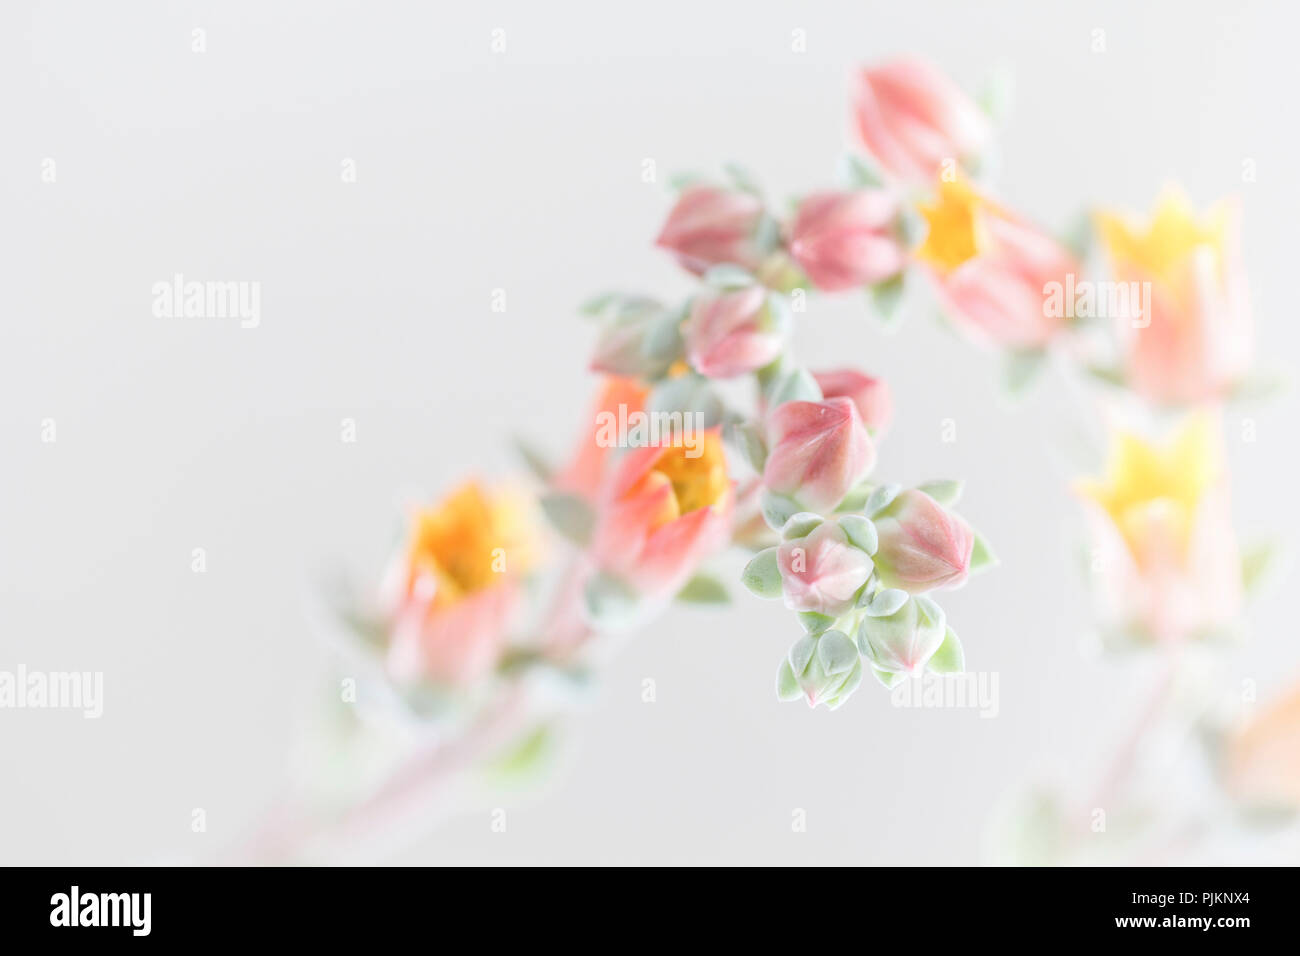 Delicate flowers of a succulent plant in pastel colors, Stock Photo